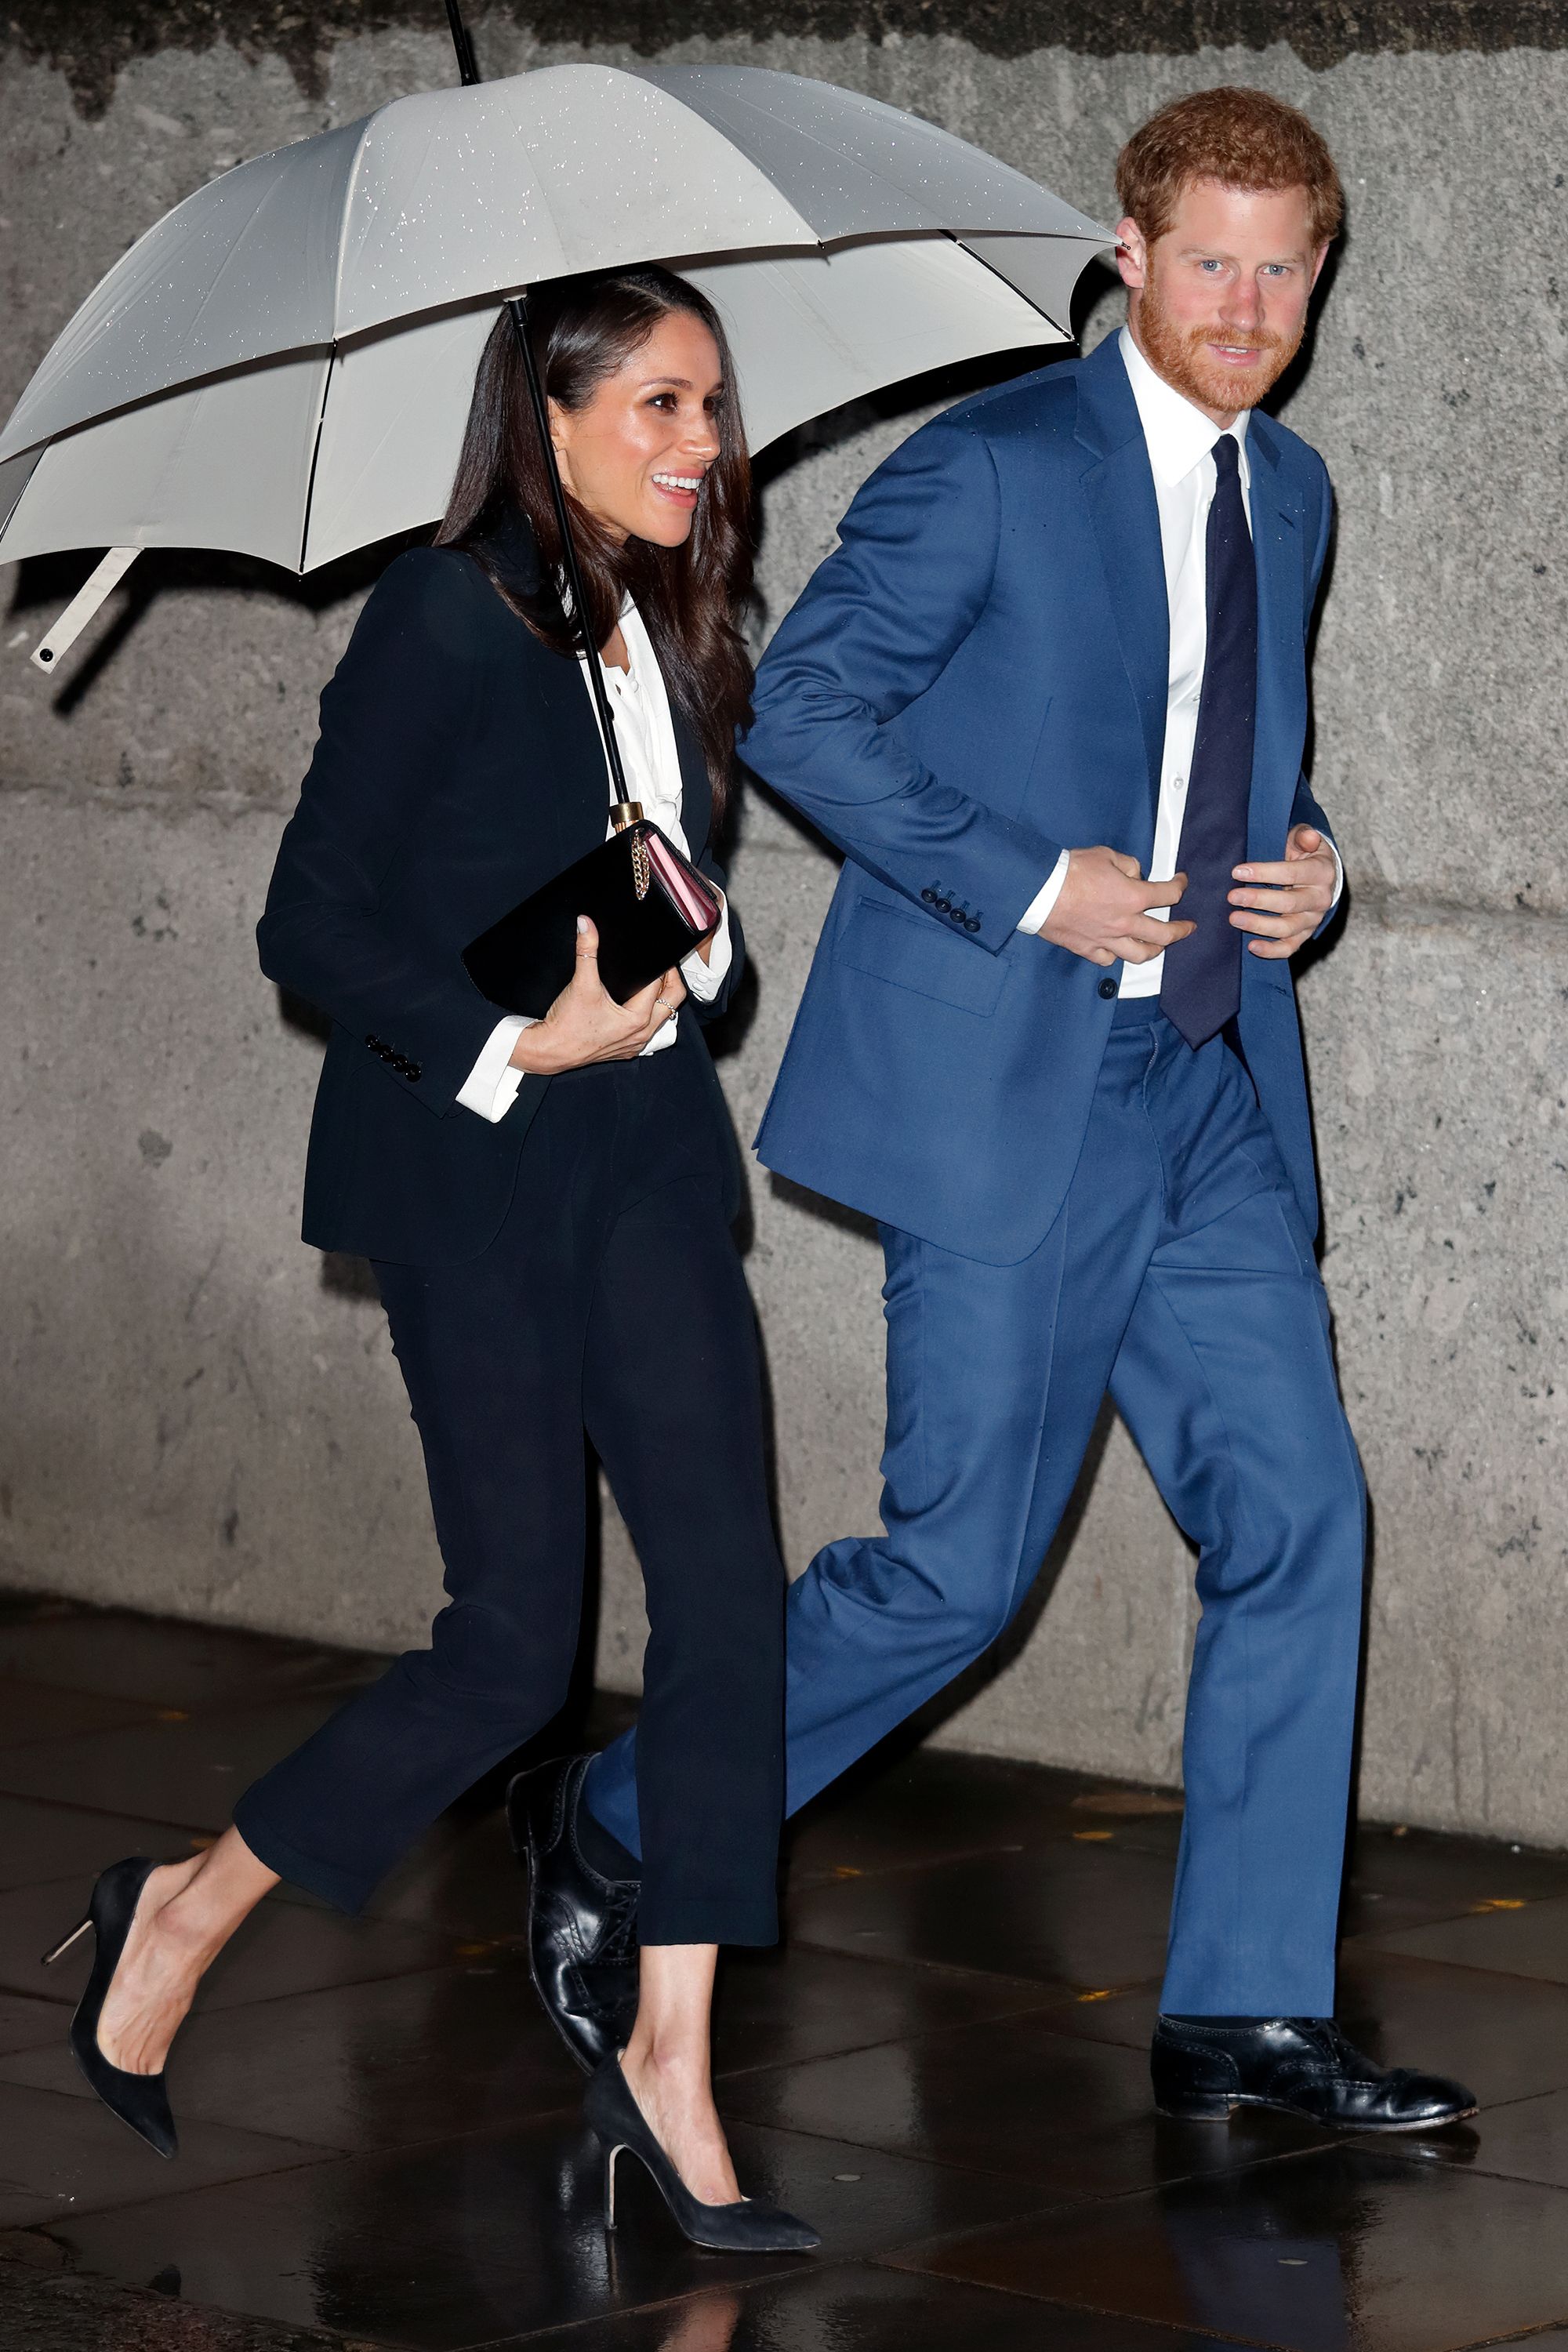 https://hips.hearstapps.com/hmg-prod.s3.amazonaws.com/images/hbz-prince-harry-meghan-markle-cute-moments-gettyimages-913568396-1523379072.jpg?crop=1xw:1xh;center,top